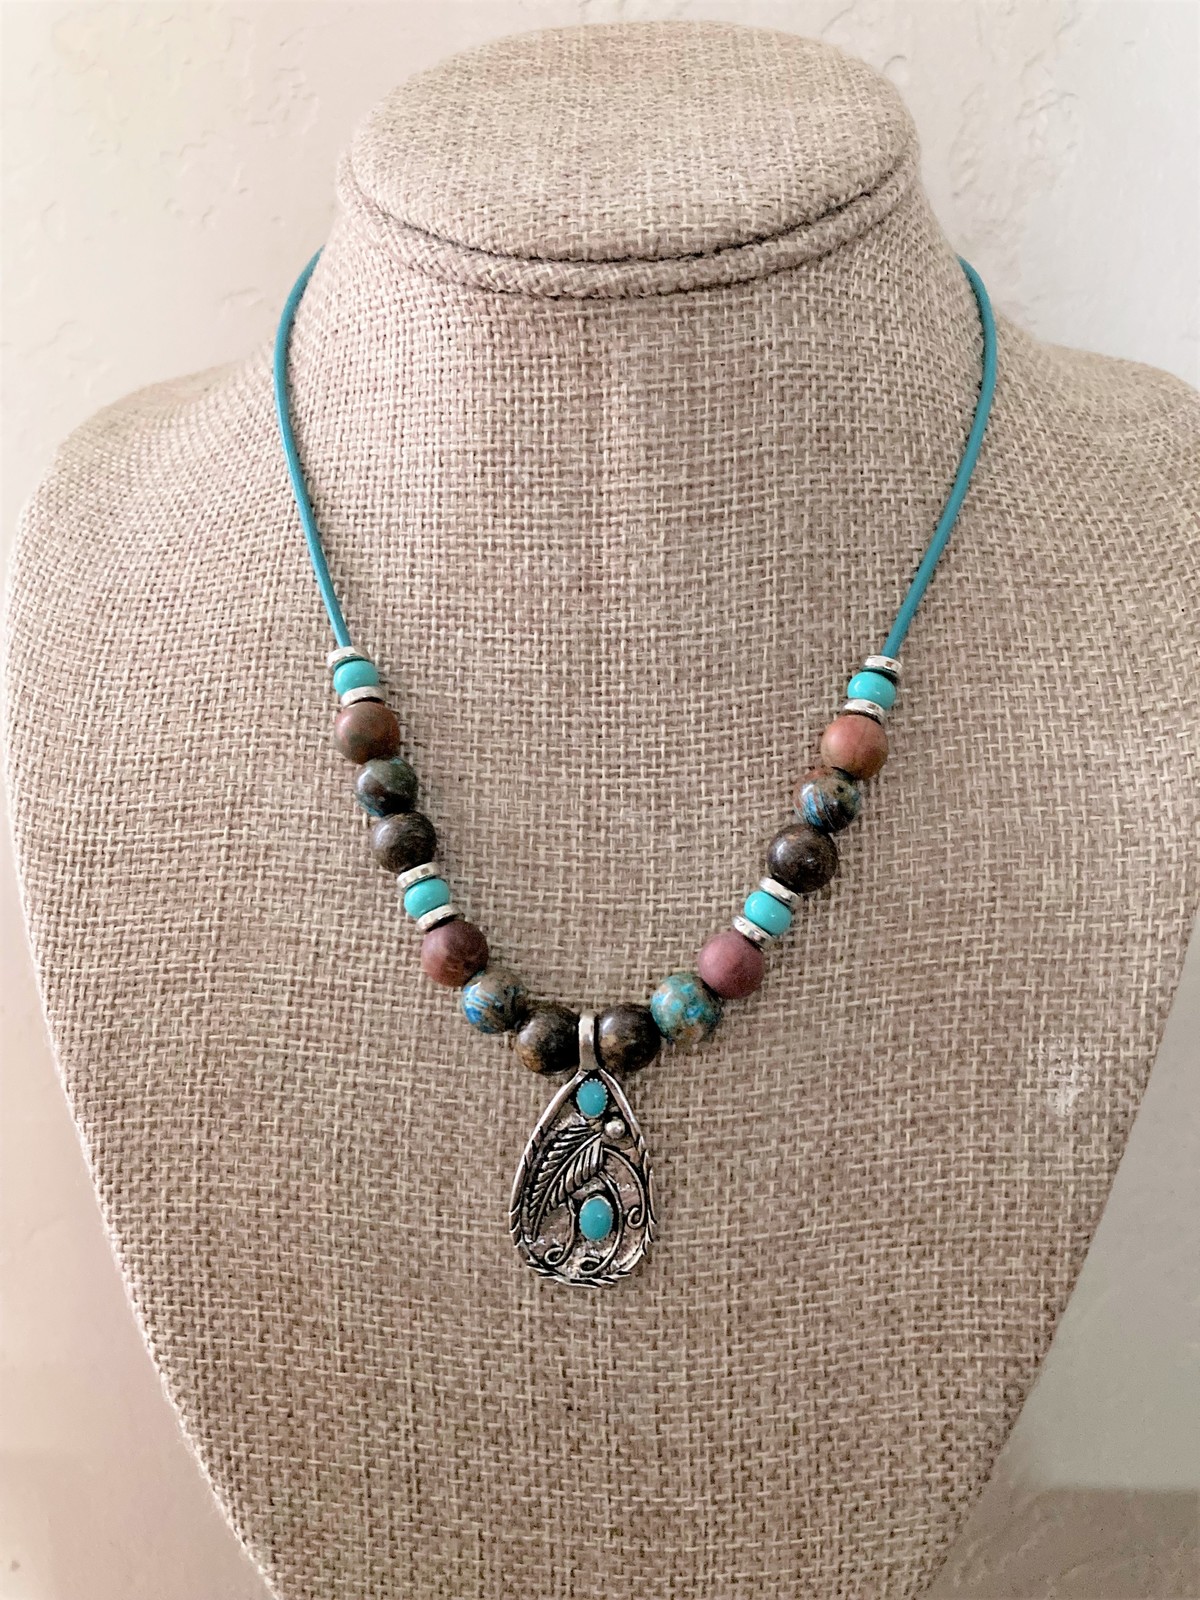 Primary image for 9.25 Silver Teardrop Feather Pendant With Bronzite/Multi Jasper Stone Accents